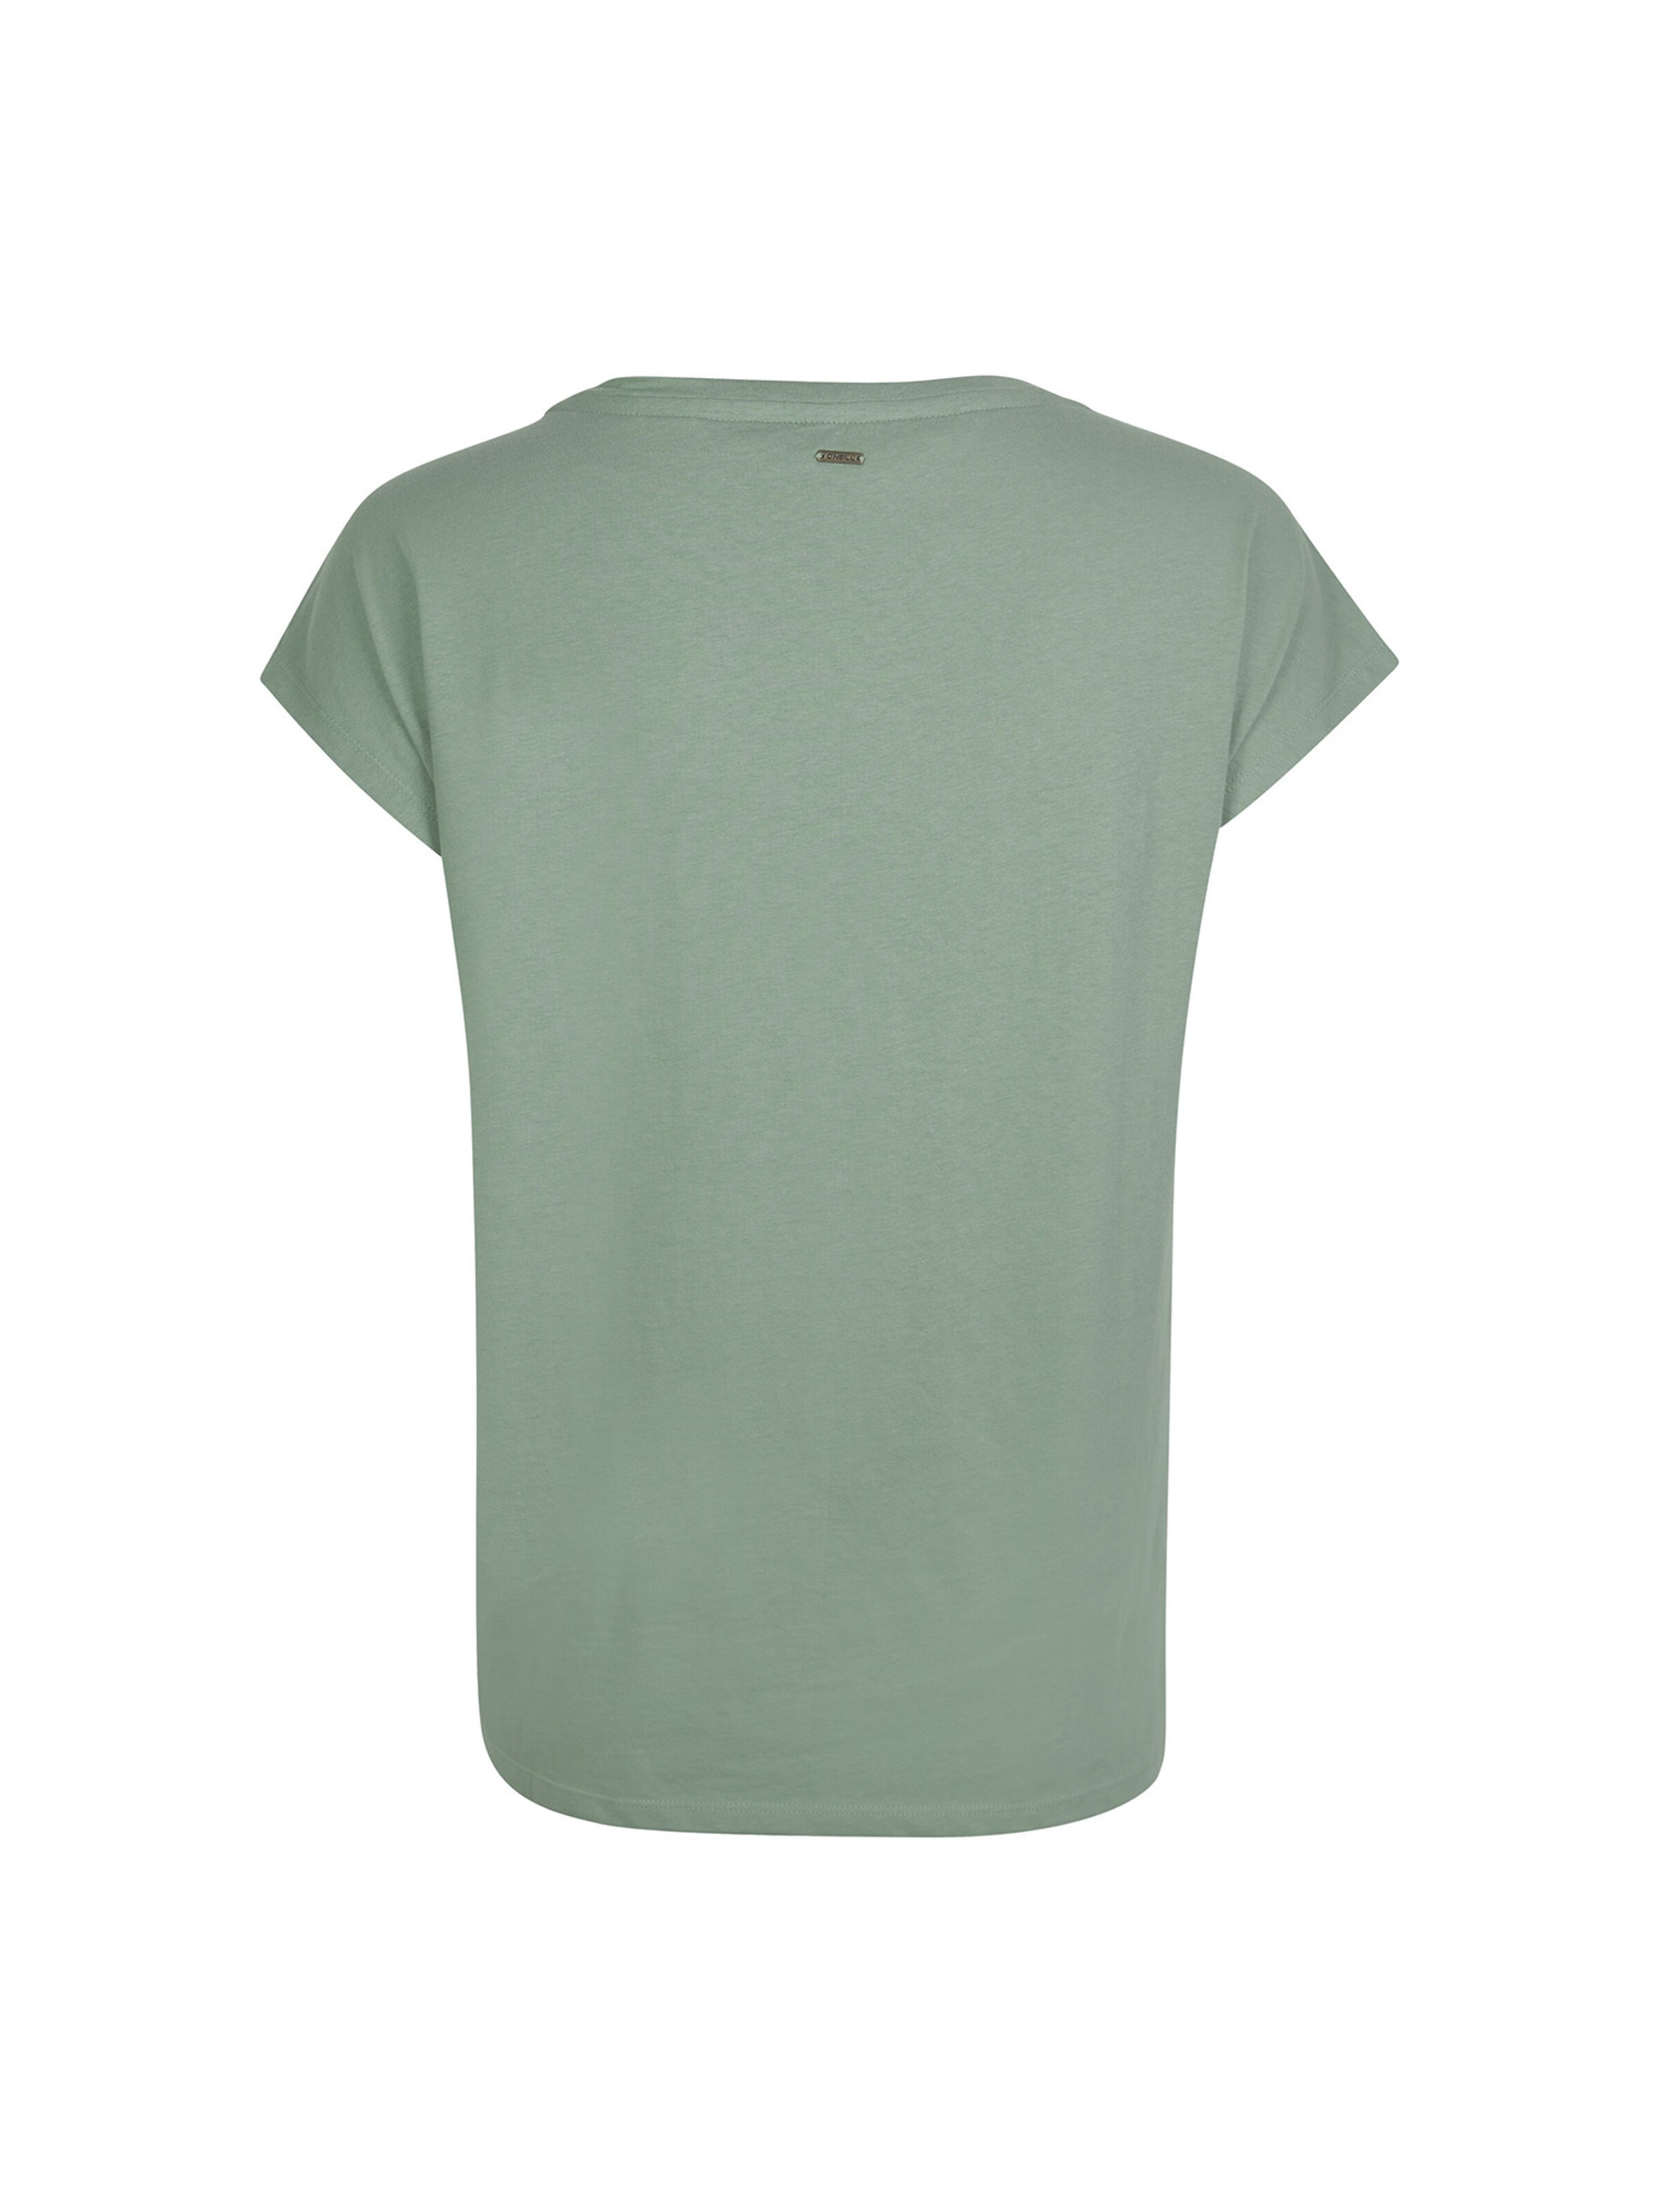 ONEILL T-Shirt Essential Graphic in Oliv 